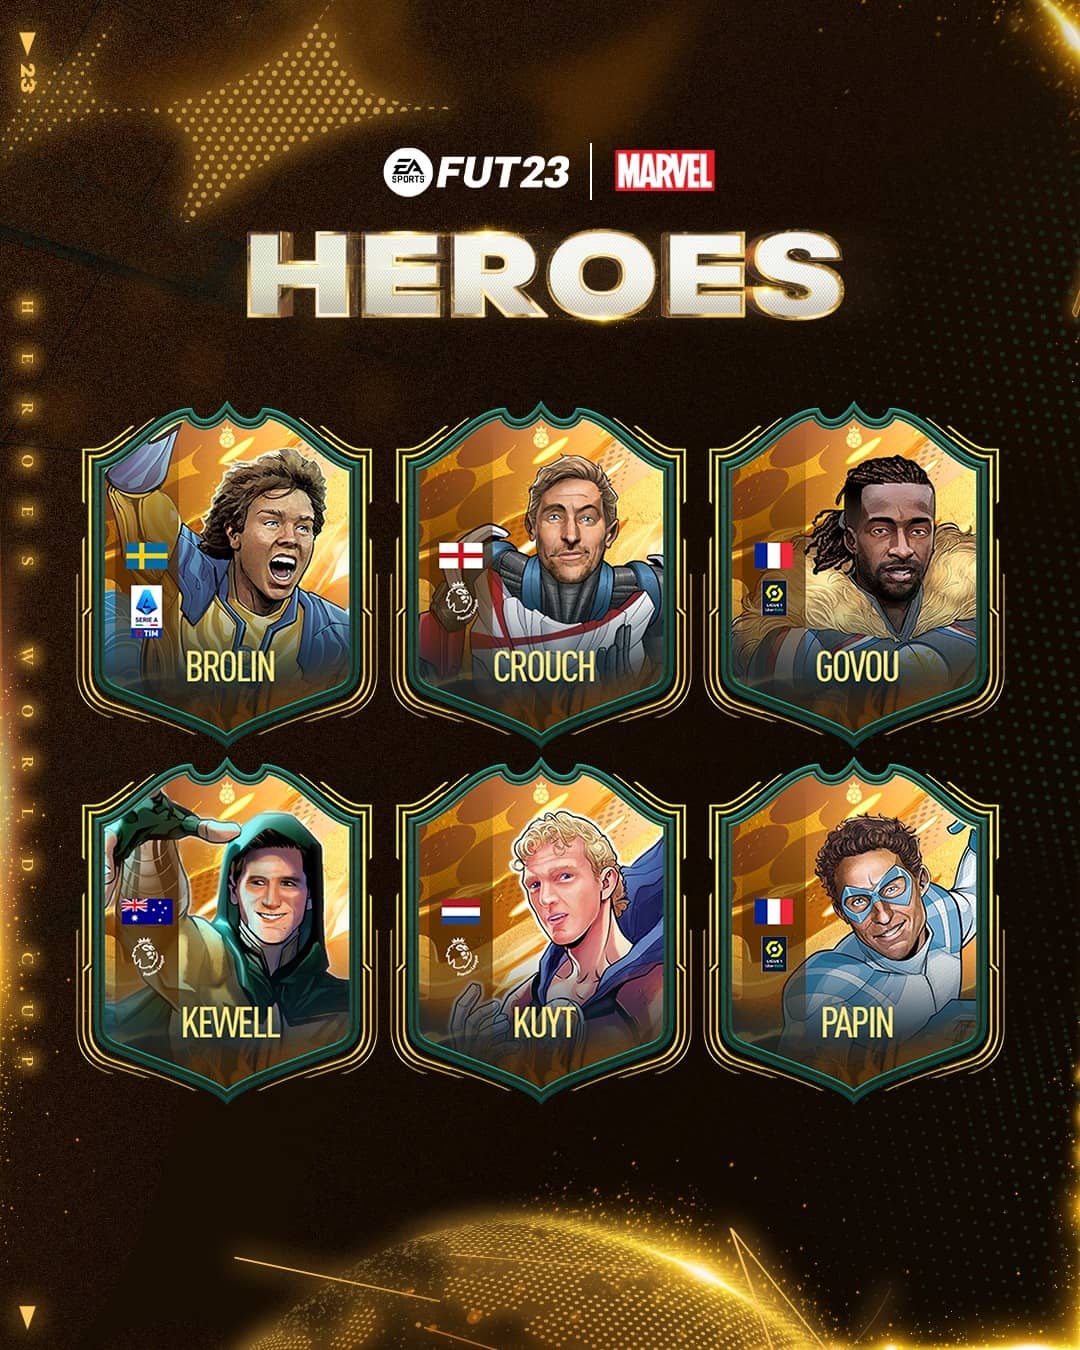 FIFA 23: Annunciate sei nuove carte heroes. Crouch, Brolin, Papin, Kuyt, Kewell e Govou